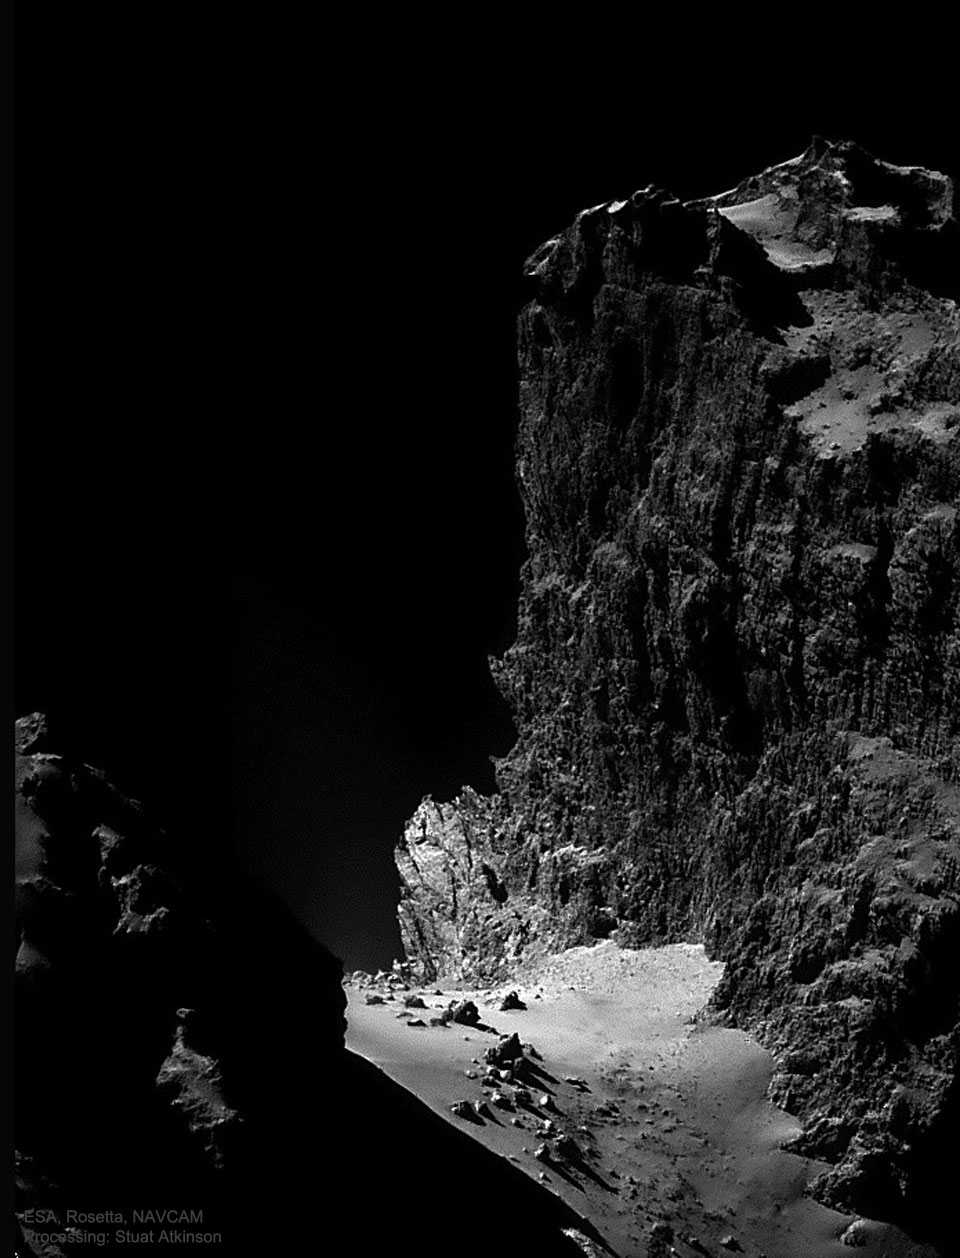 The featured image shows a kilometer-high cliff
that occurs on Comet Churyumov-Gerasimenko as imaged by
ESA's Rosetta spacecraft in 2014.
Please see the explanation for more detailed information.